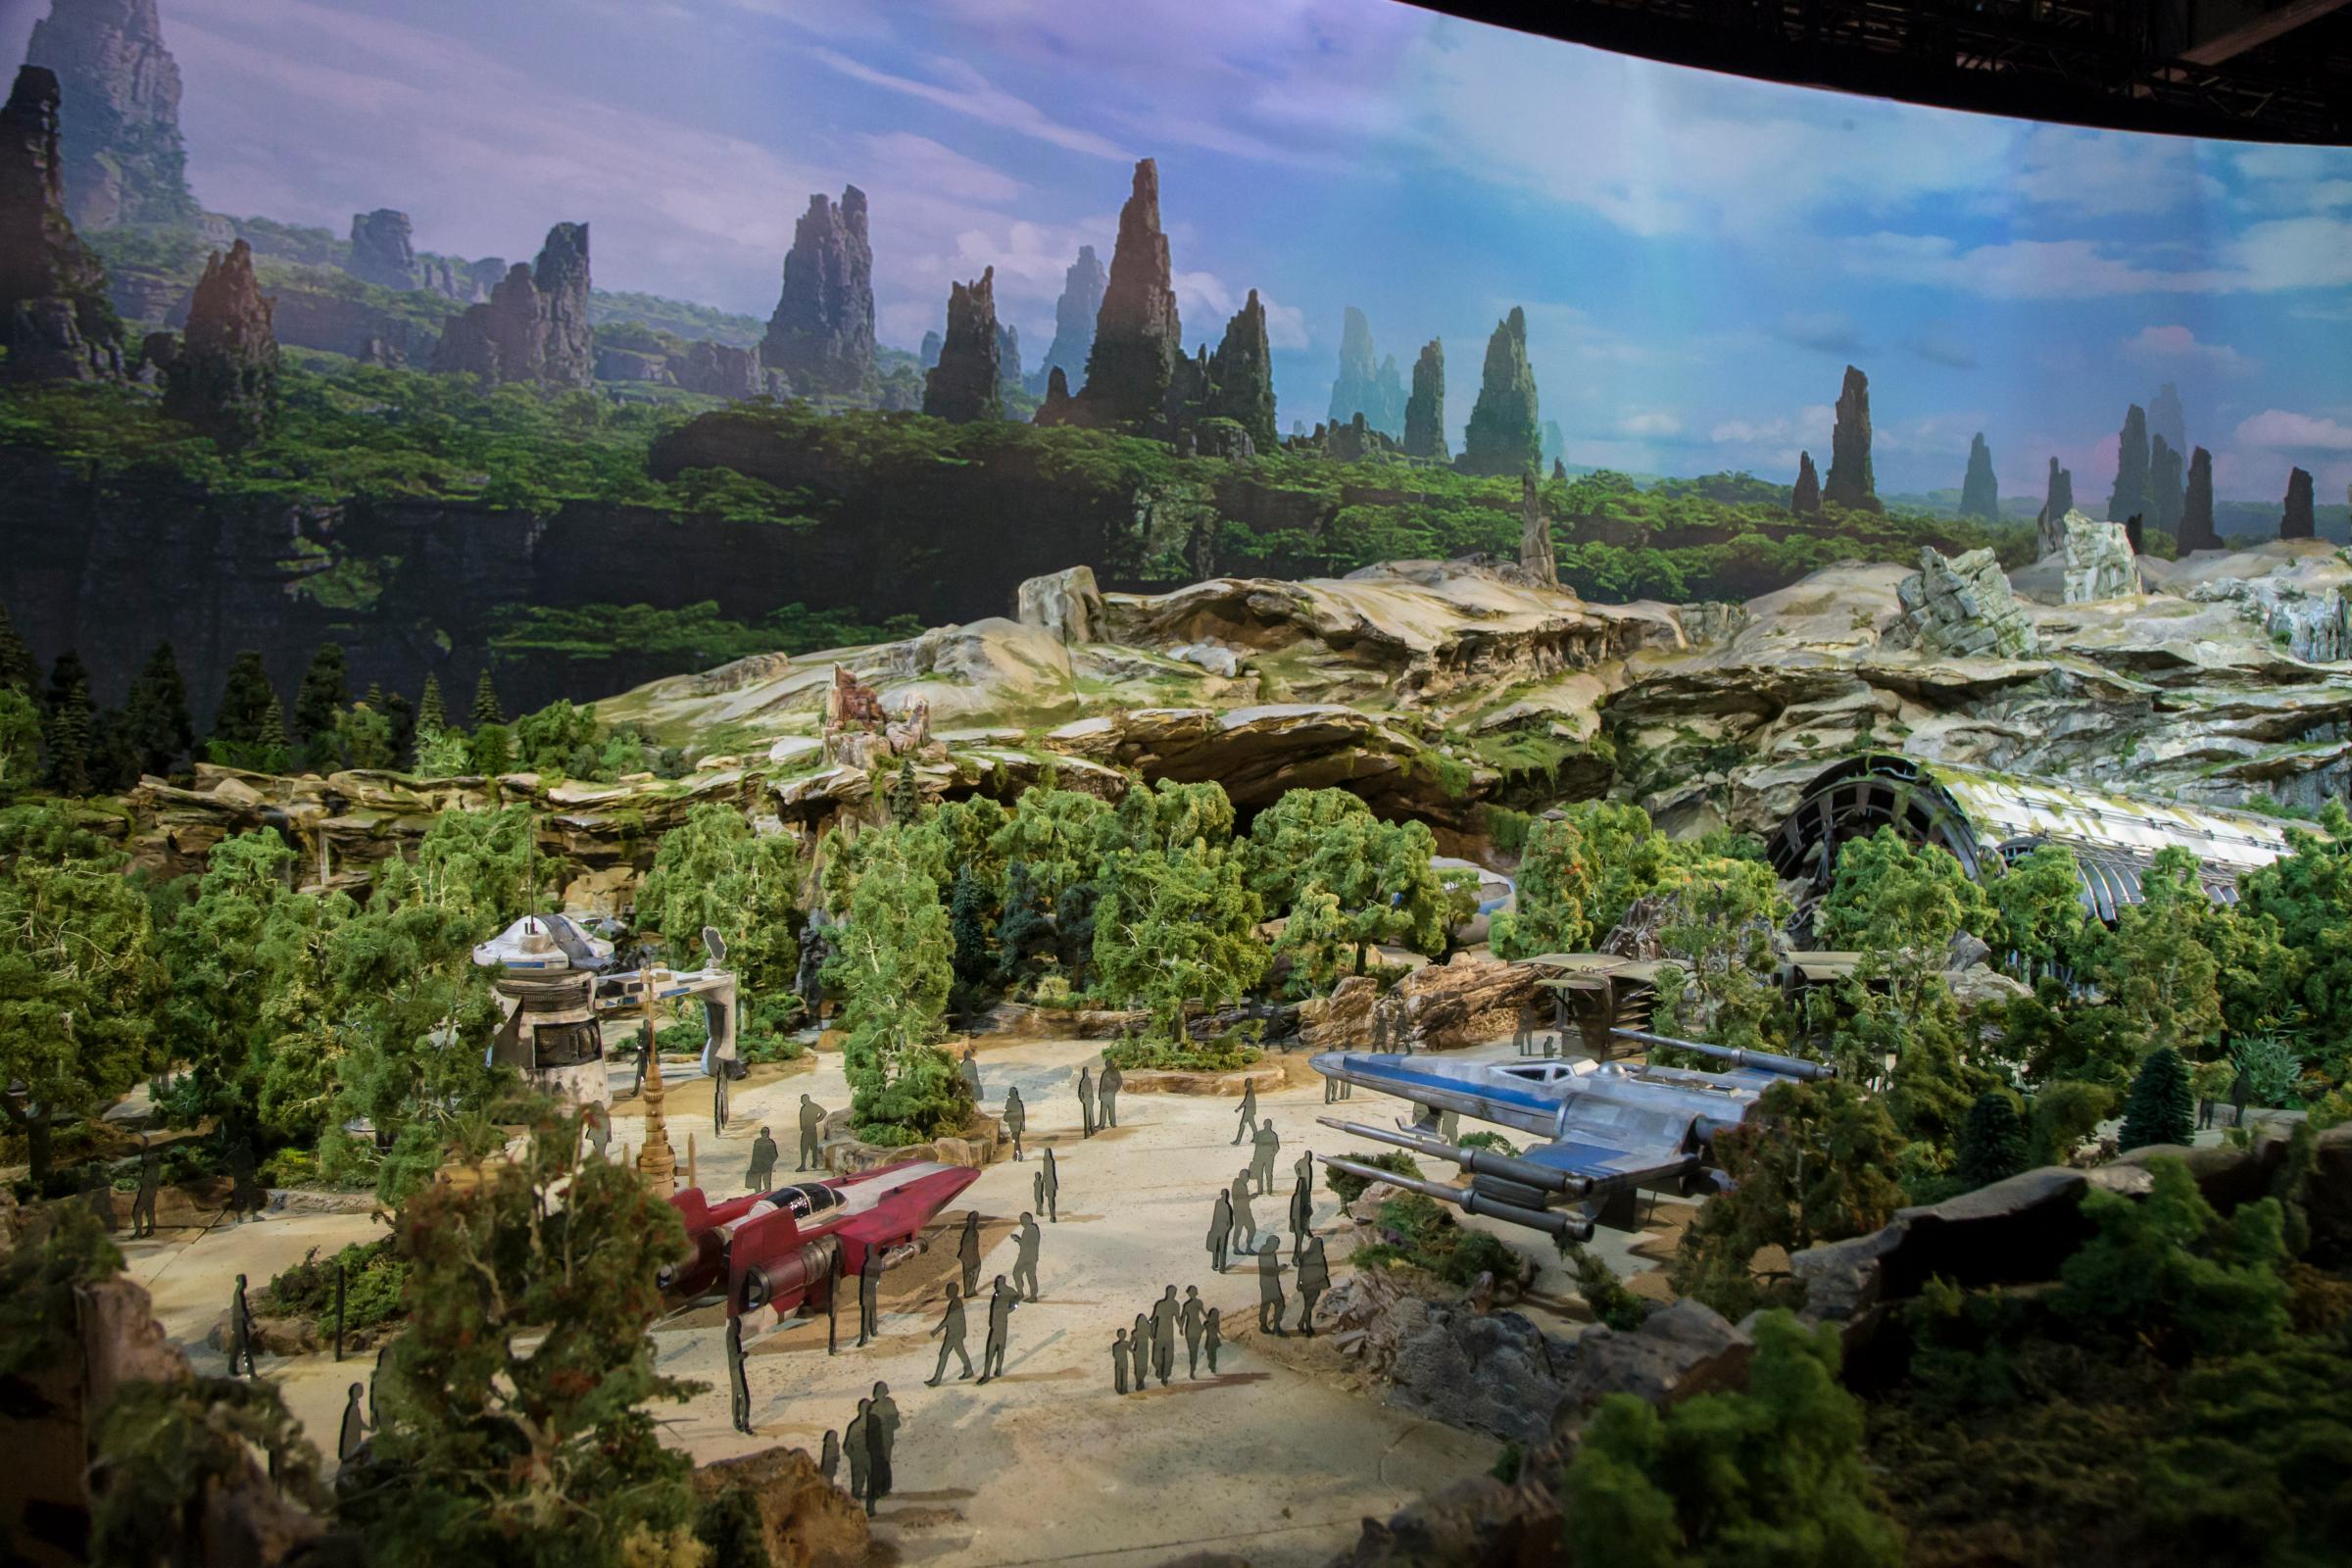 The fully detailed model of the Star Wars-themed park, under development at Disneyland in Anaheim, Calif., remains on display in Walt Disney Parks and Resorts 'A Galaxy of Stories' pavilion throughout D23 Expo at the Anaheim Convention Center. The exhibition gives D23 Expo guests an up-close look at what's to come on this never-before seen planet.